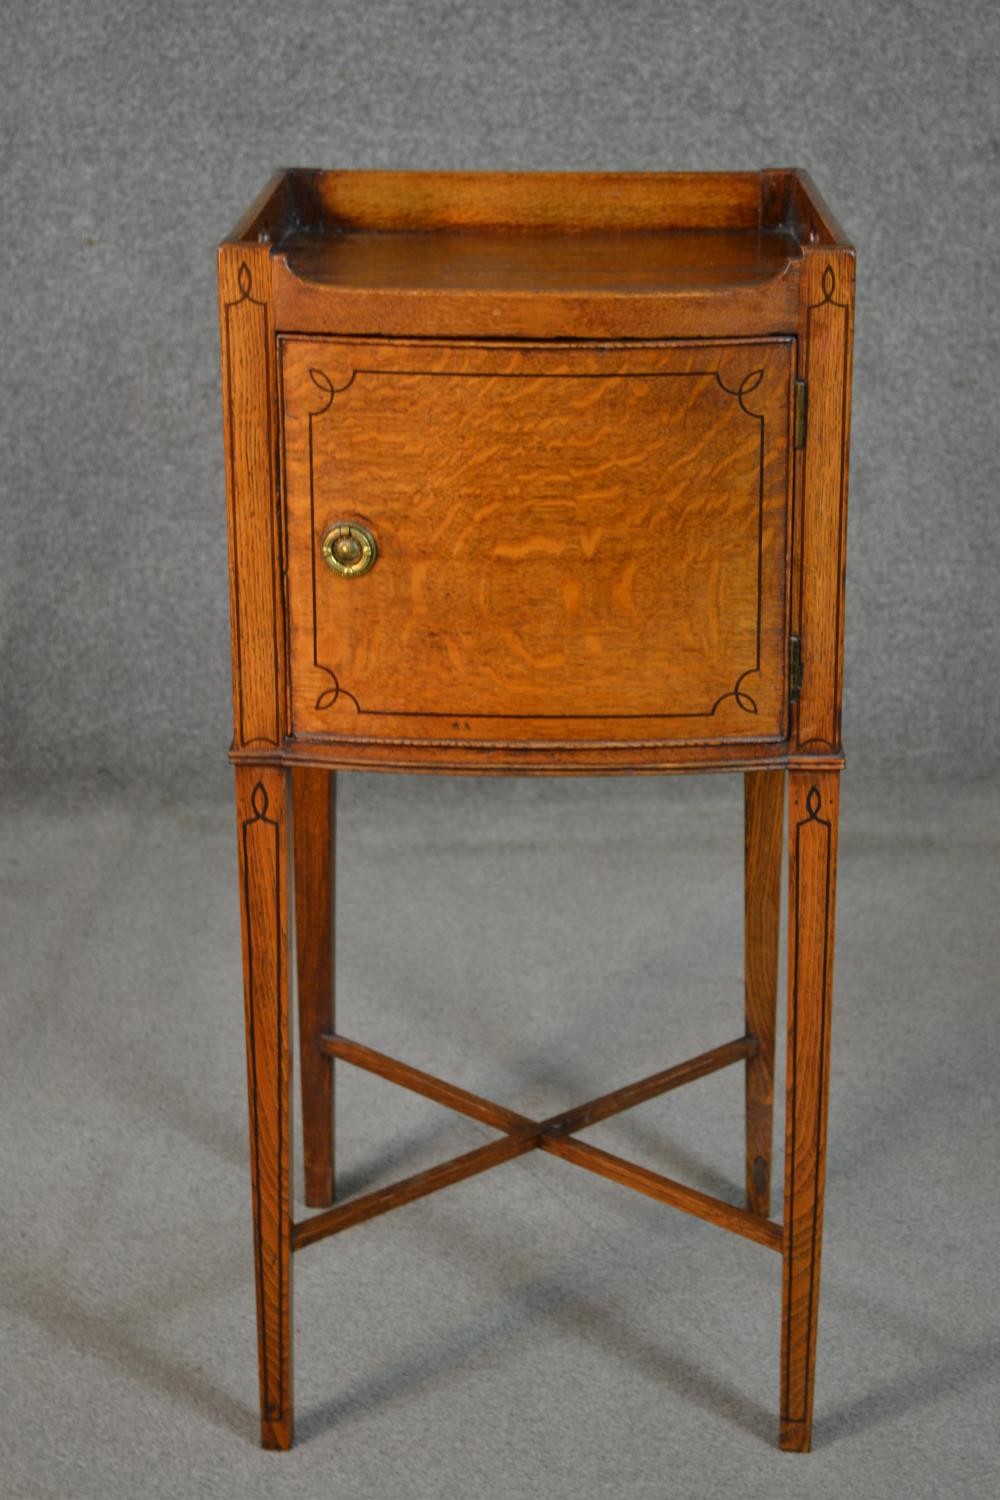 A George III style oak and inlaid bedside cabinet, the gallery top with handles, over a cupboard